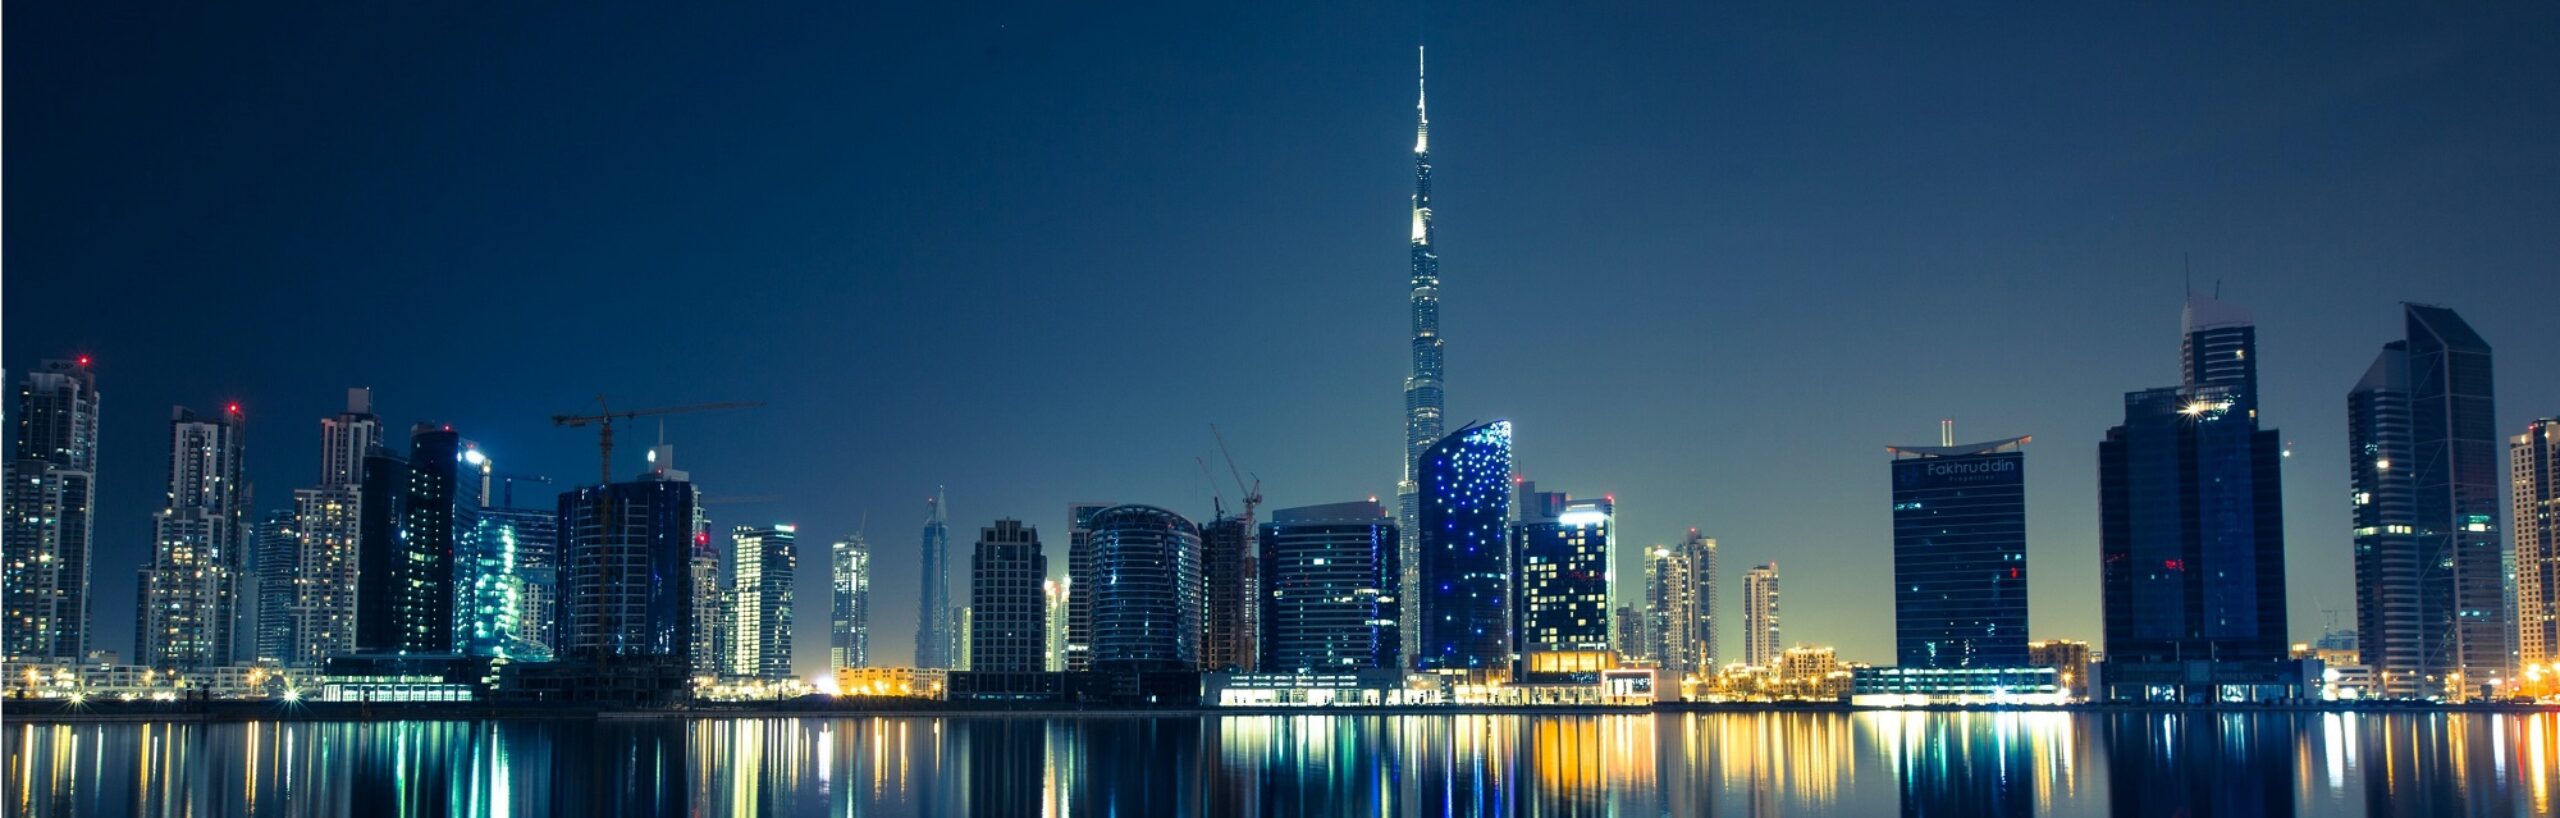 Dubai skyline at night, with reflections of buildings and lights in water